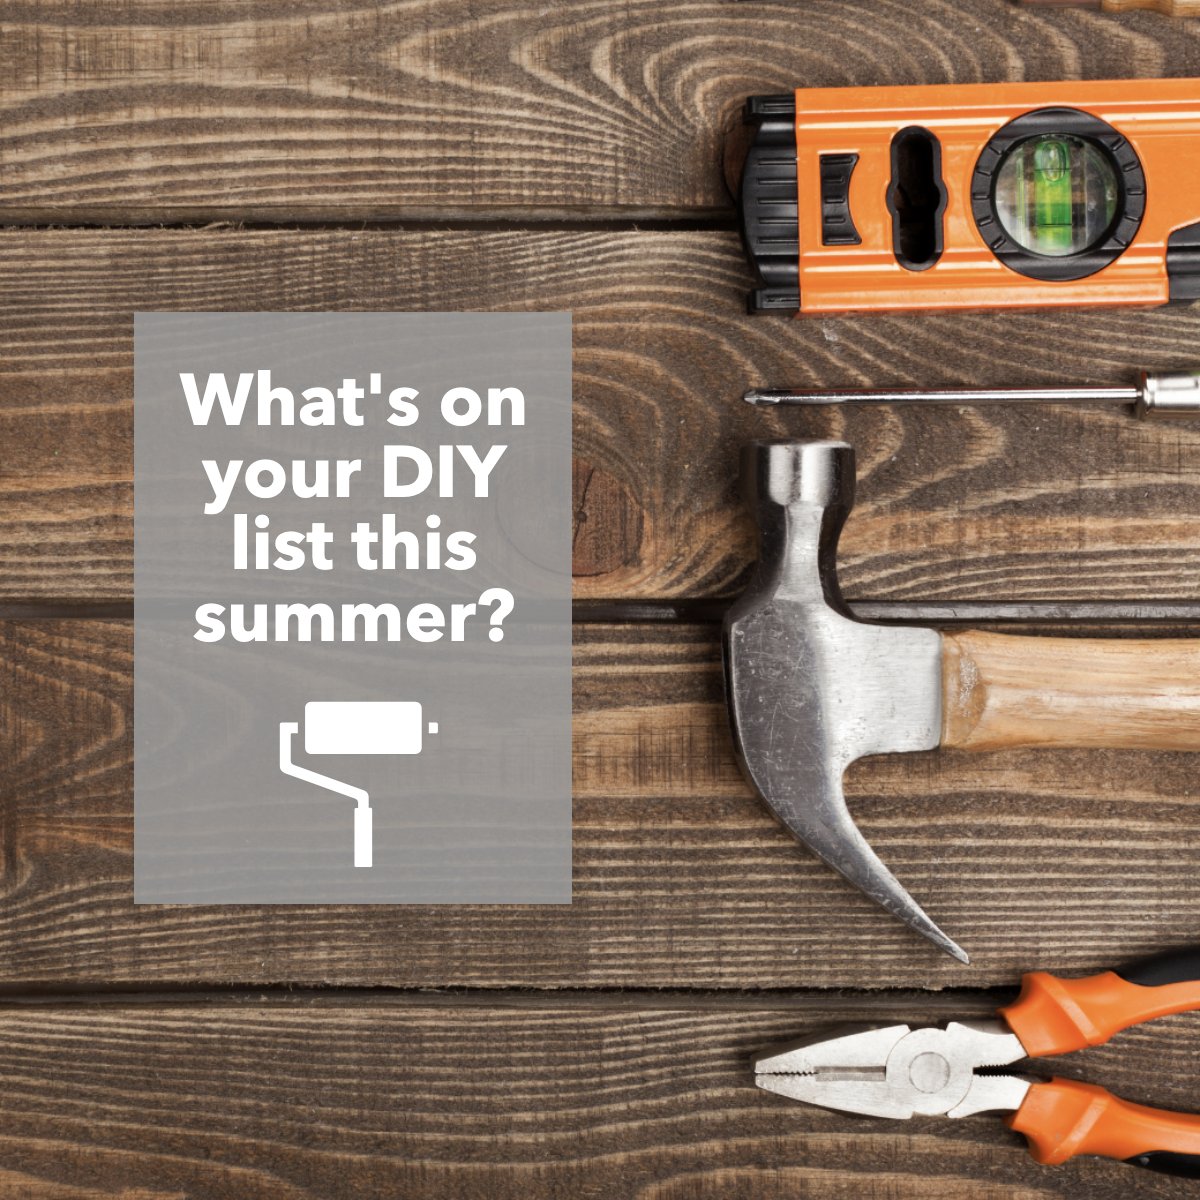 Tell us all about your summer projects ☀️! 

#question    #DIY    #DIYproject    #fixerupper    #tools

#Karencynowa #charlottenc #luxuryrealestate